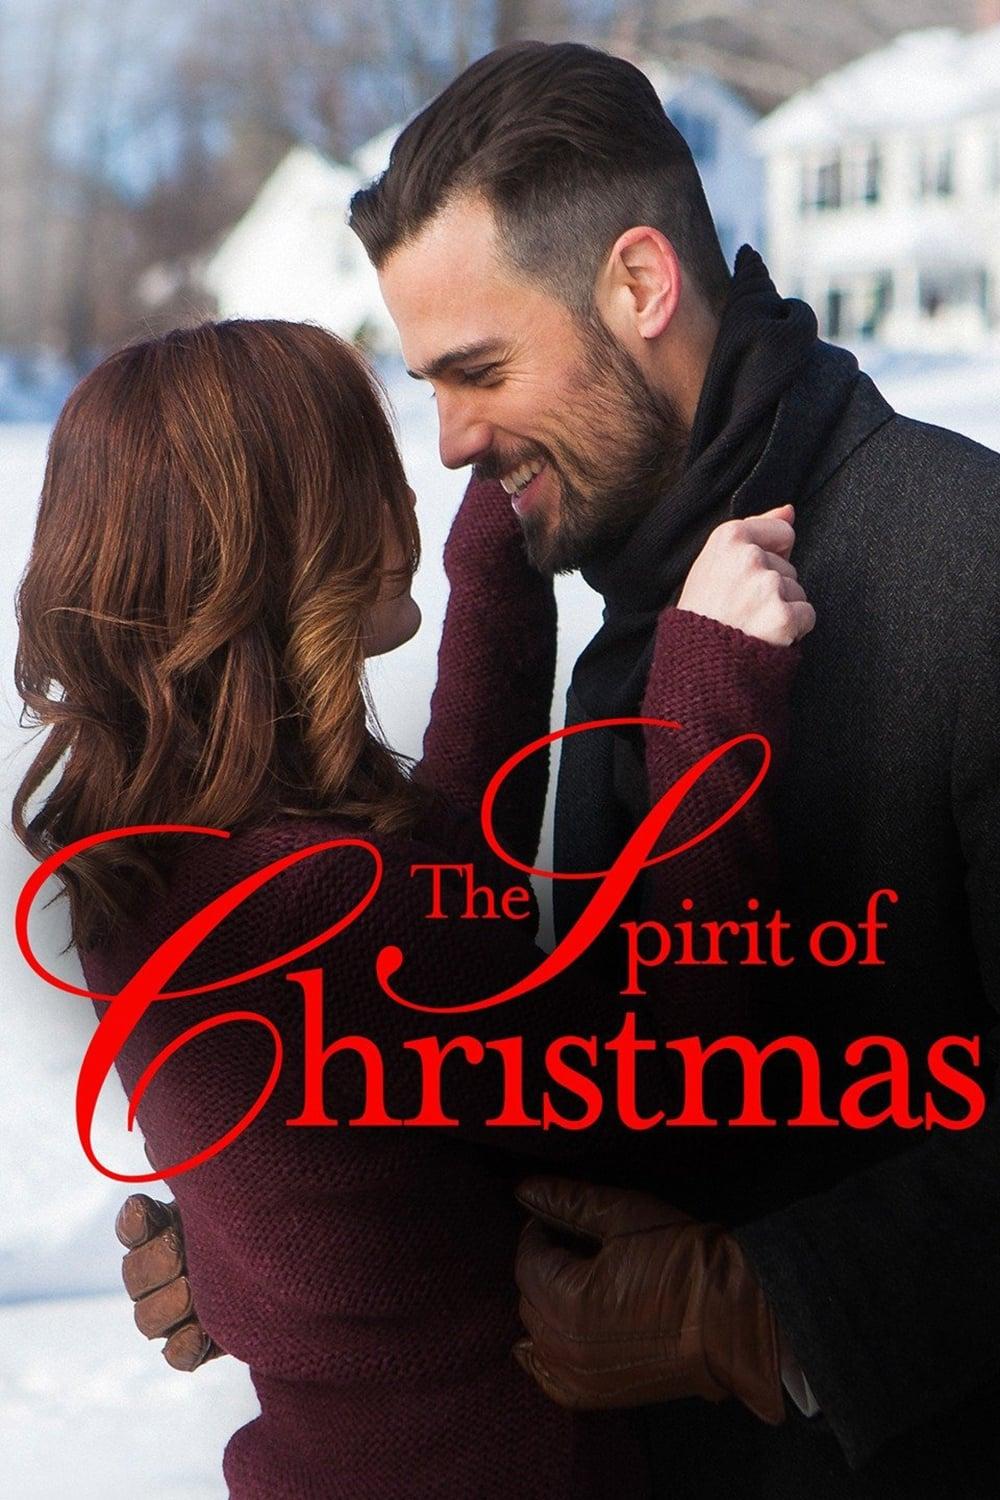 The Spirit of Christmas poster